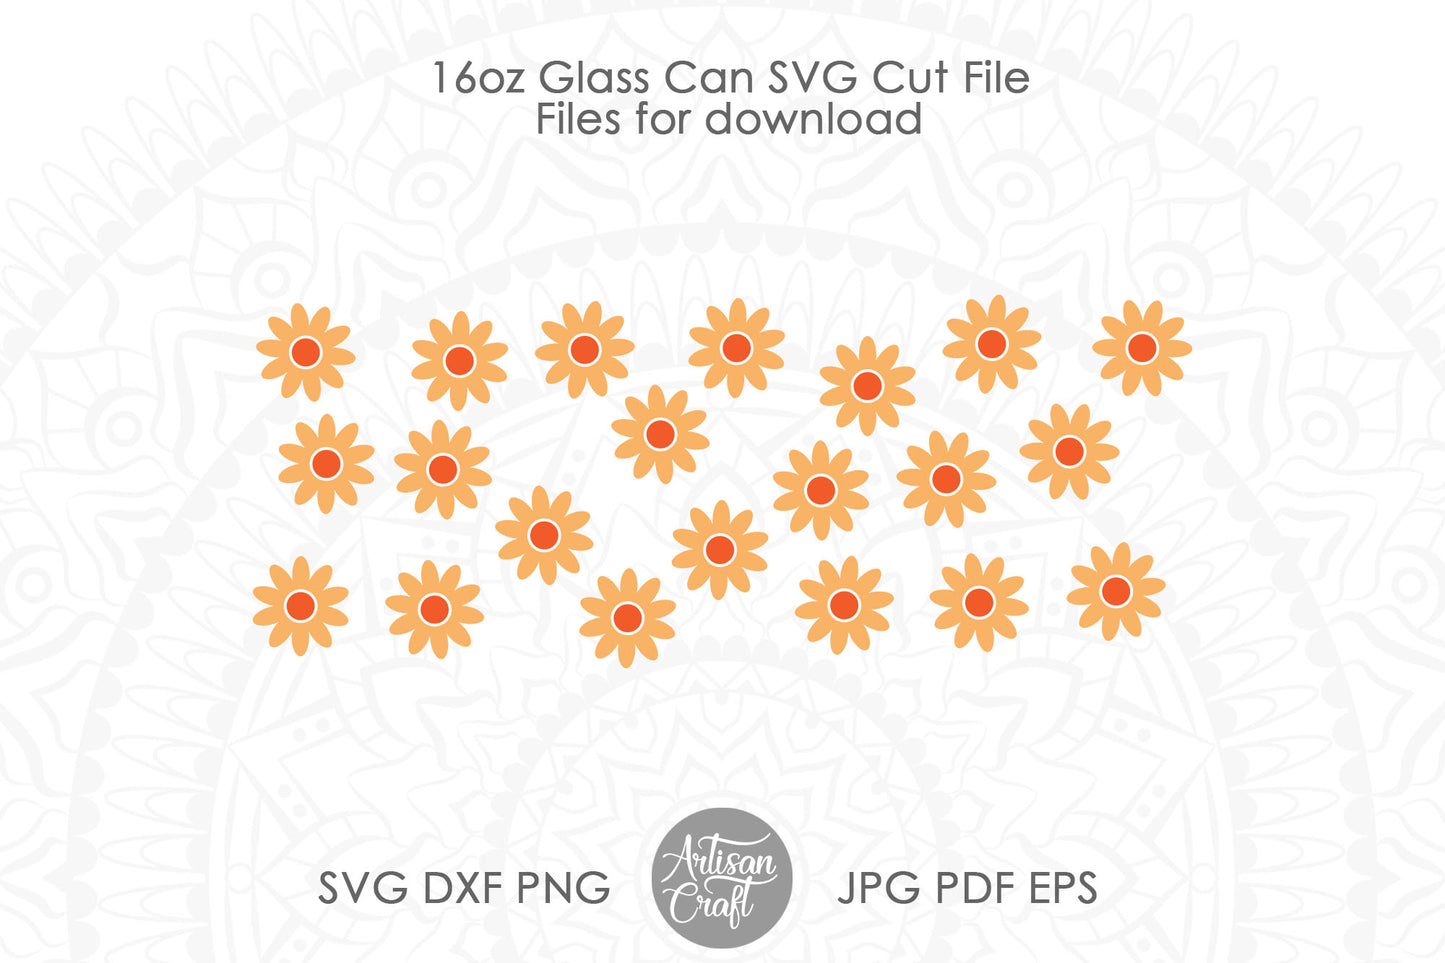 Floral beer can glass, daisy flower SVG for 16oz can glass